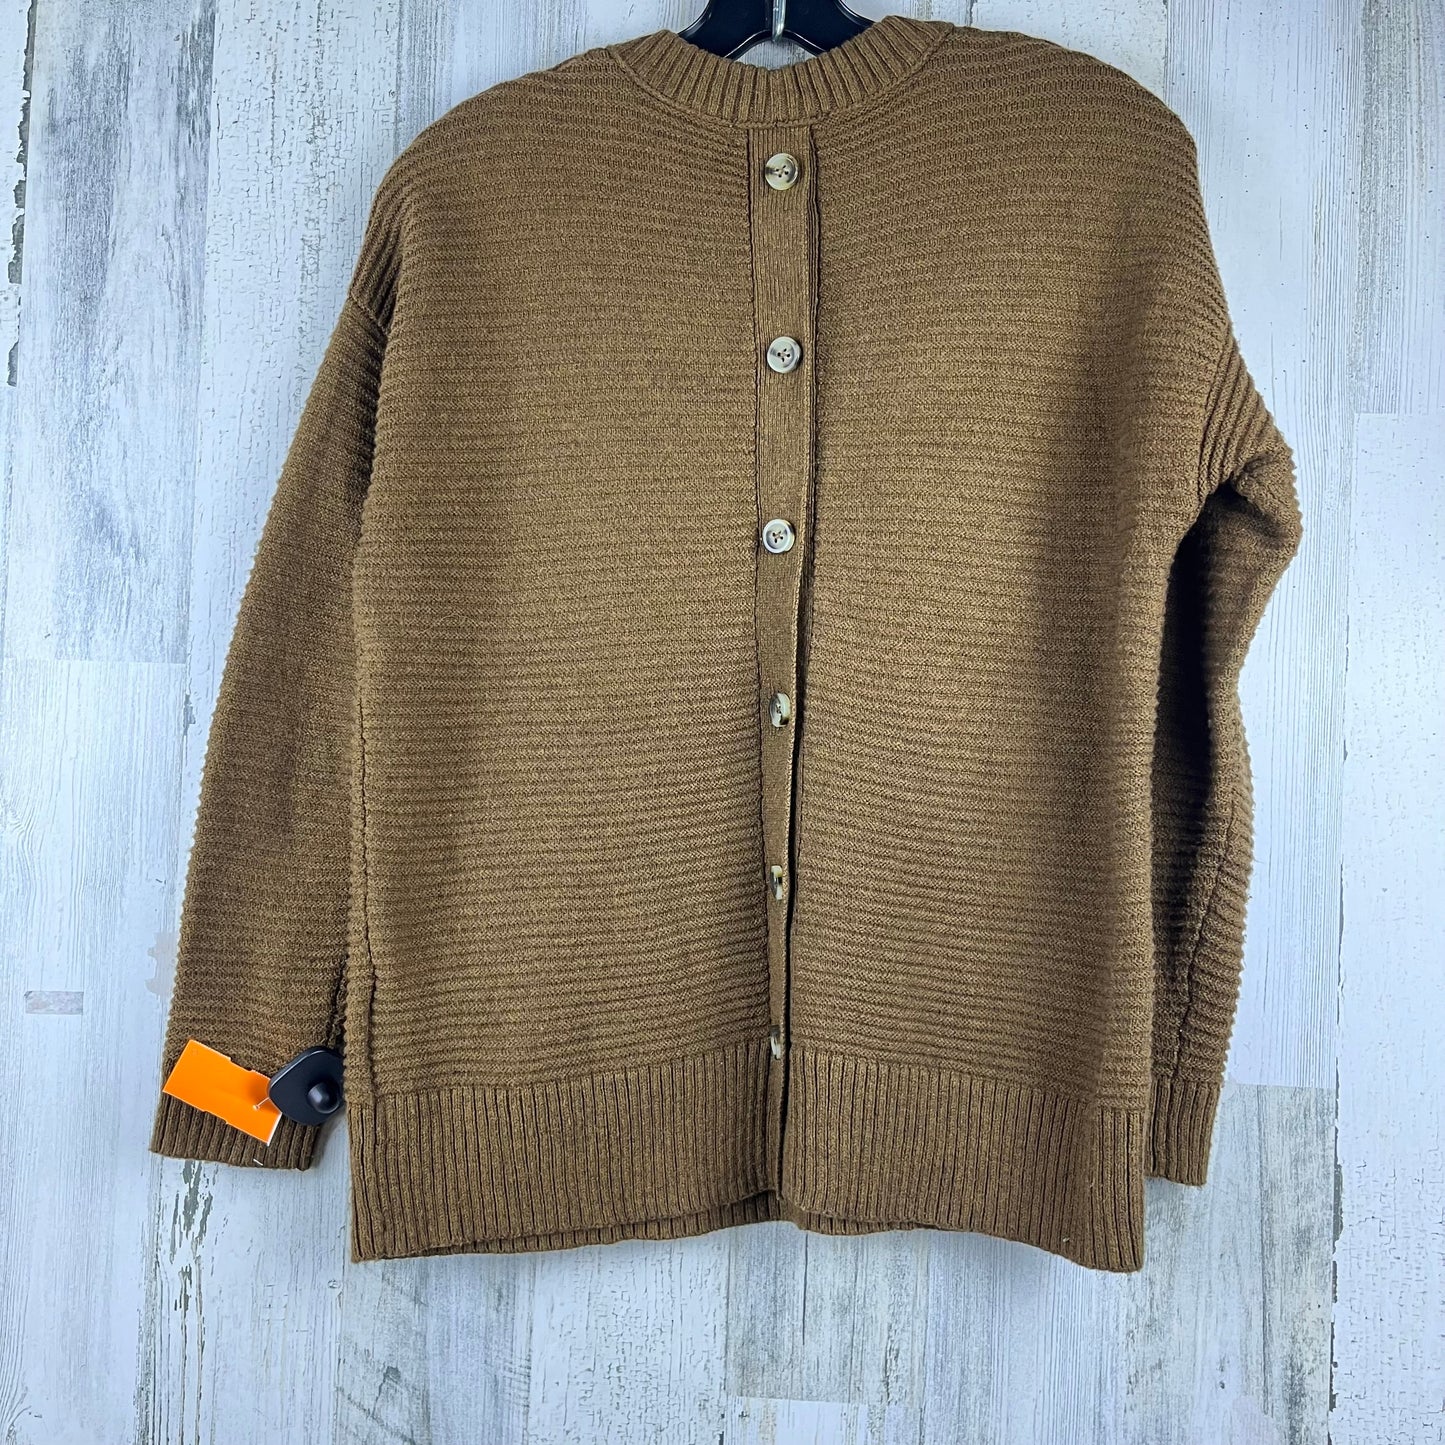 Sweater By Madewell  Size: Xs